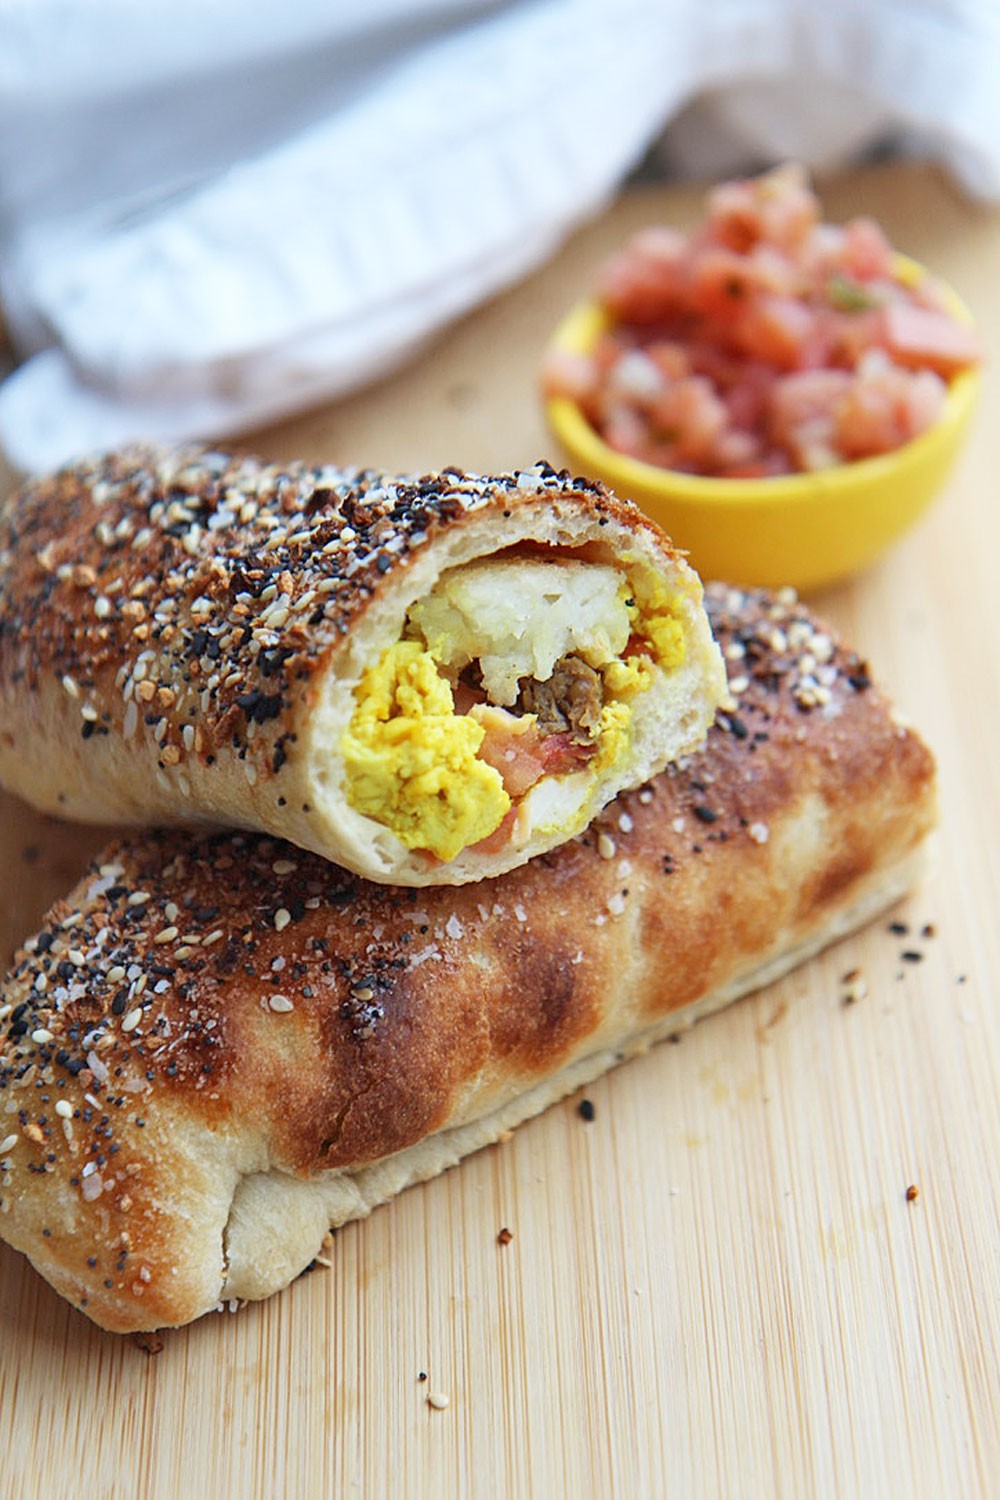 How to Make a Bagel Burrito (Breakfast Burrito). This is the prefect meal prep recipe for a busy weeknight dinner. Also, very budget friendly meal if you use the leftovers in your fridge. www.ChopHappy.com #breakfastburrito #bagelsandwichrecipe